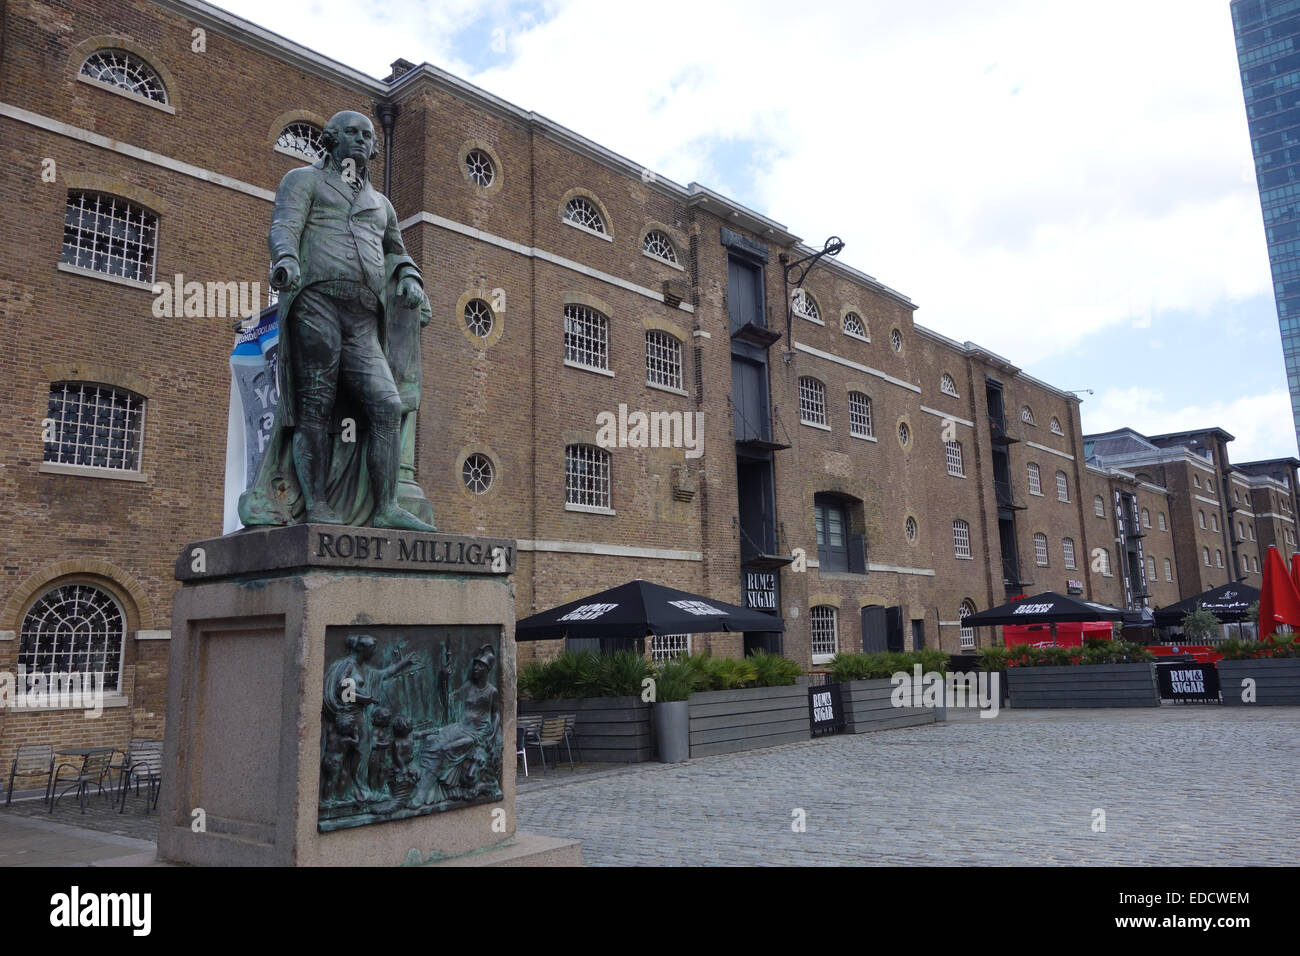 The Museum of London Docklands is a museum on the Isle of Dogs, east London that tells the history of London's River Thames and Stock Photo